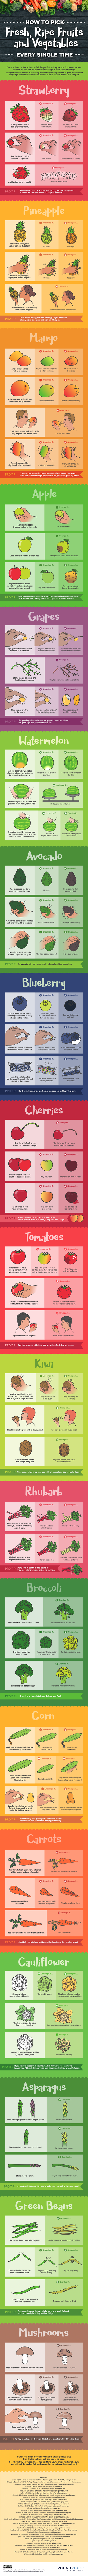 How to Pick Fresh Fruits and Vegetables in the Store